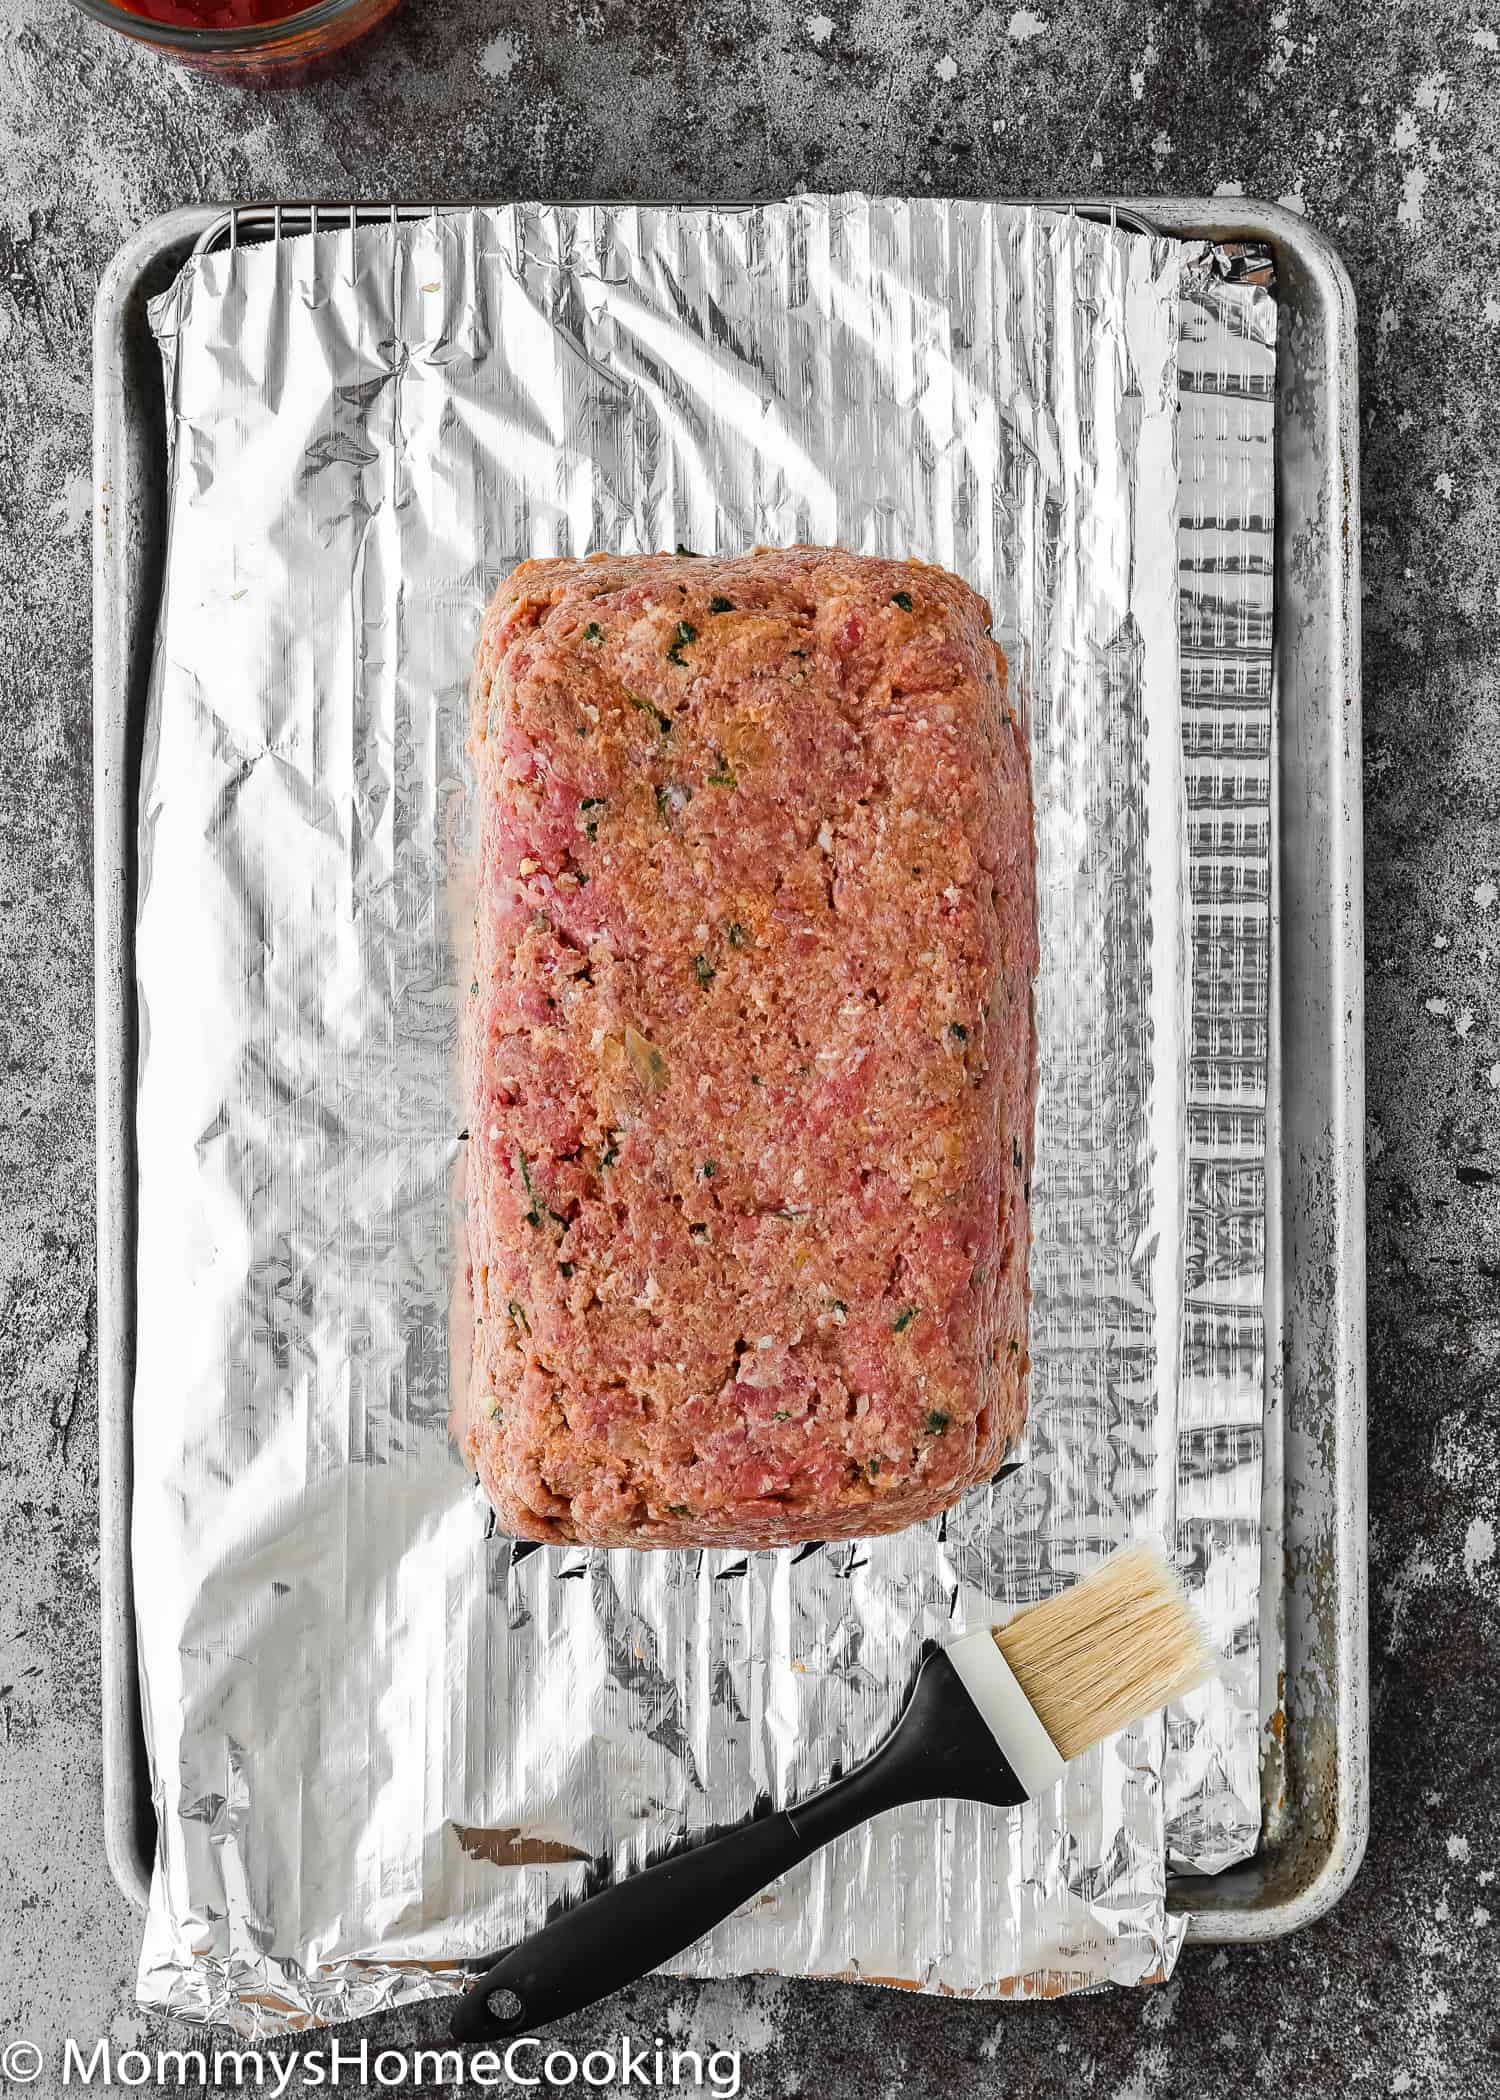  Unbaked Eggless Meatloaf over a baking tray